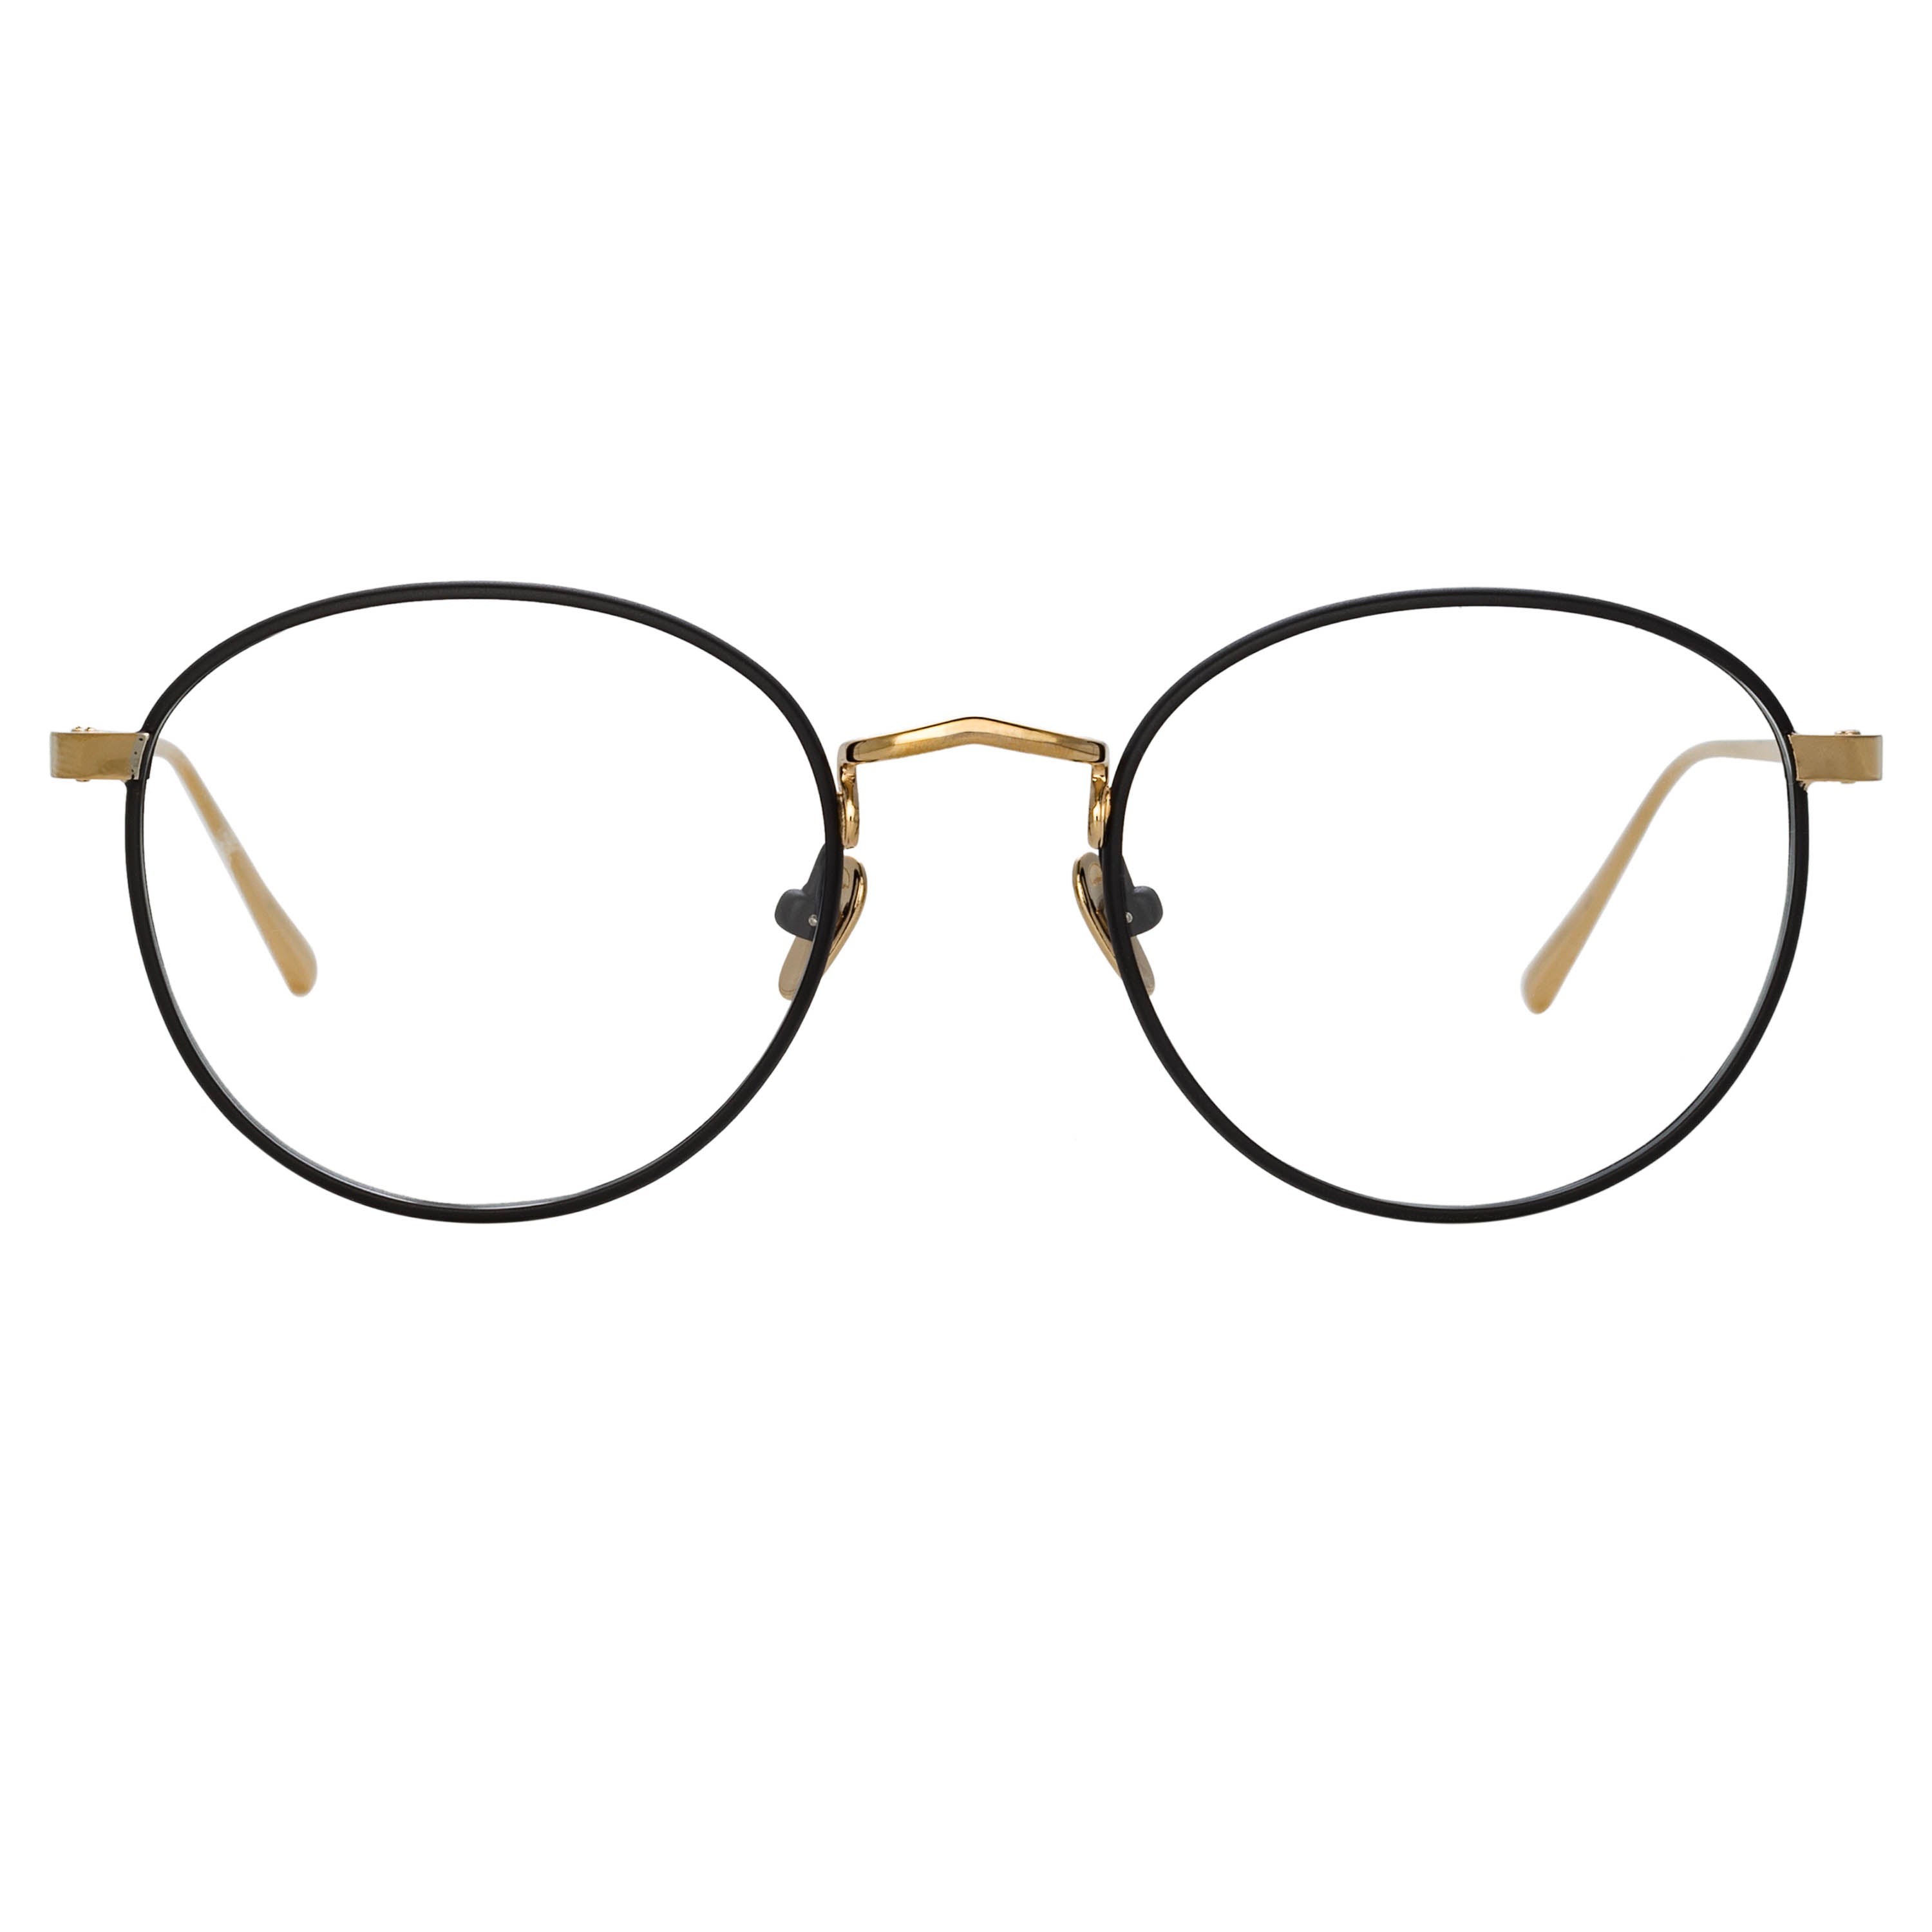 The Harrison Oval Optical Frame in Black and Light Gold (C3)